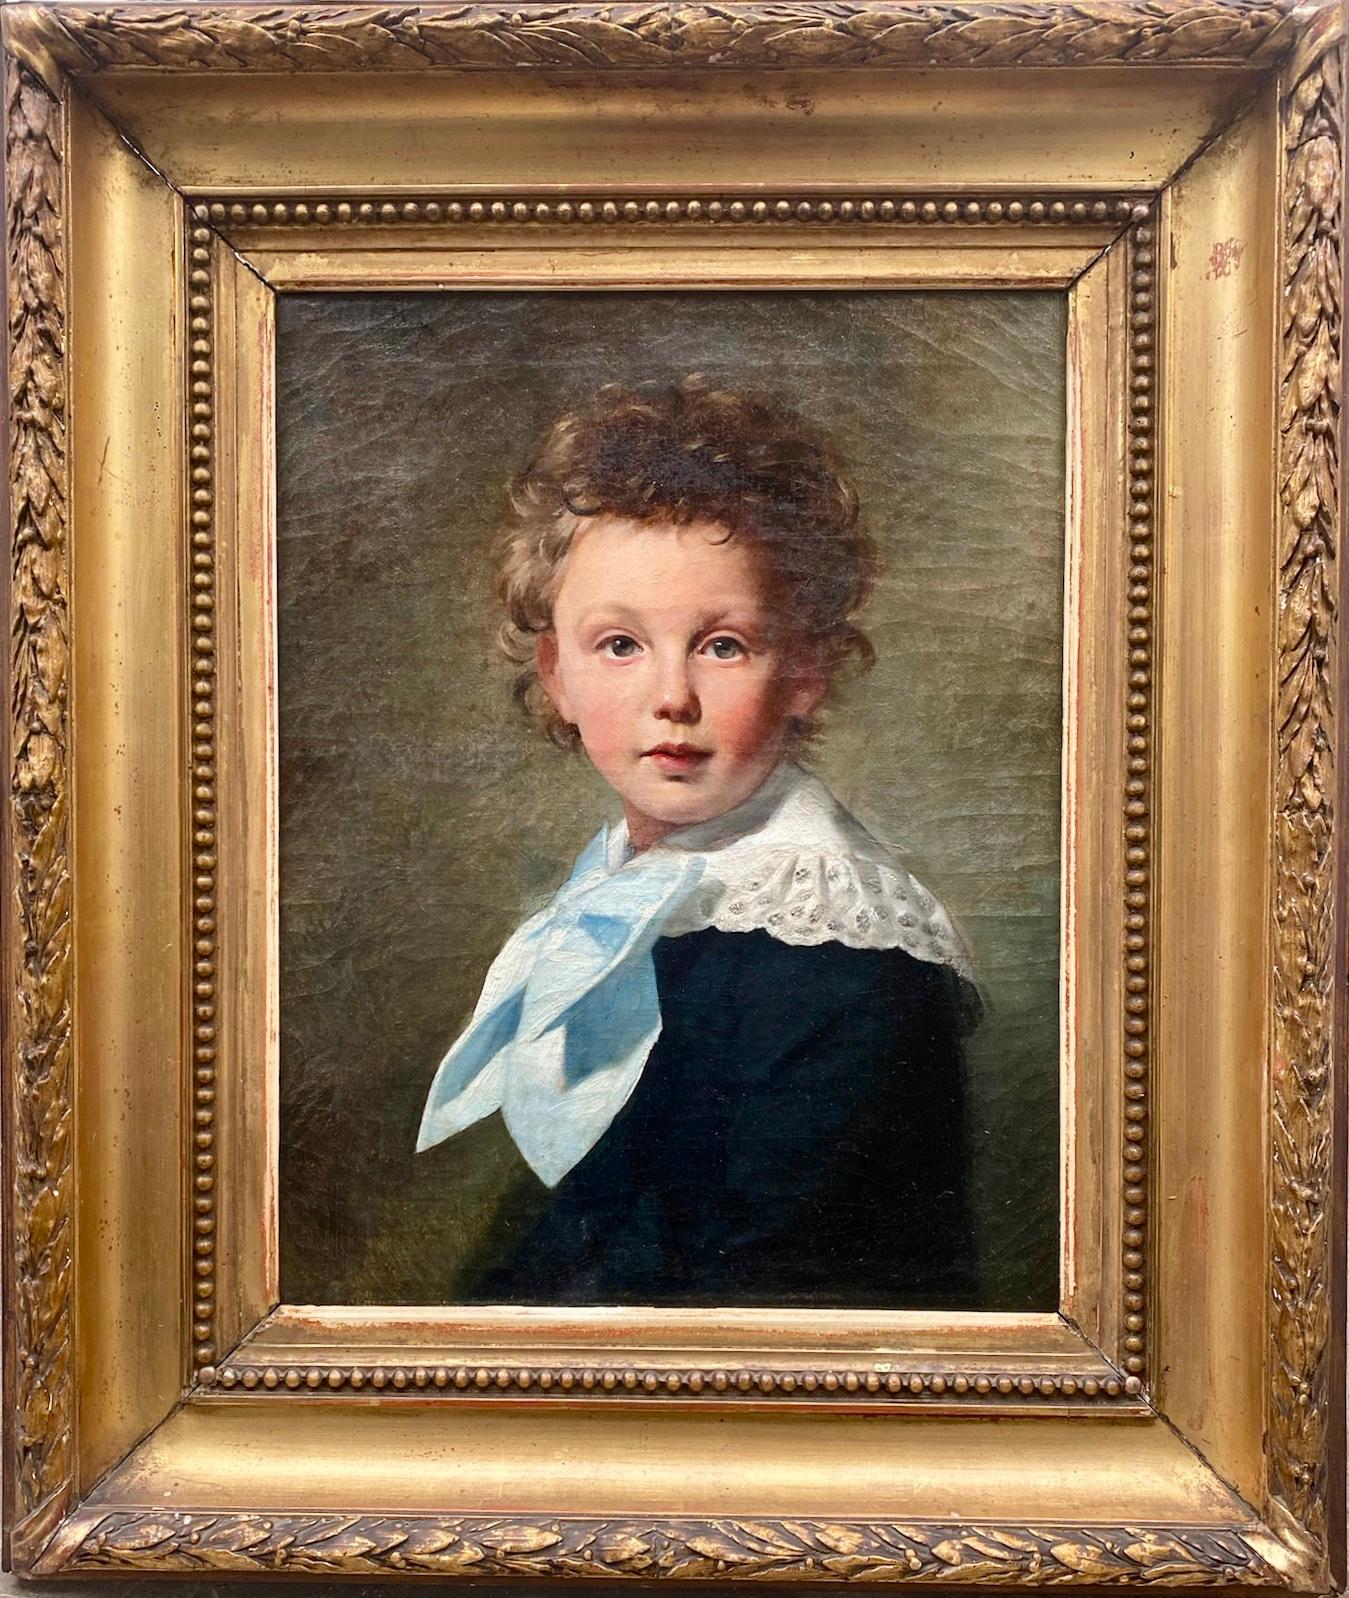 The blue bow: a little boy with tousled hair naturalistic portrait oil painting - Painting by Félix Pescador y Saldana